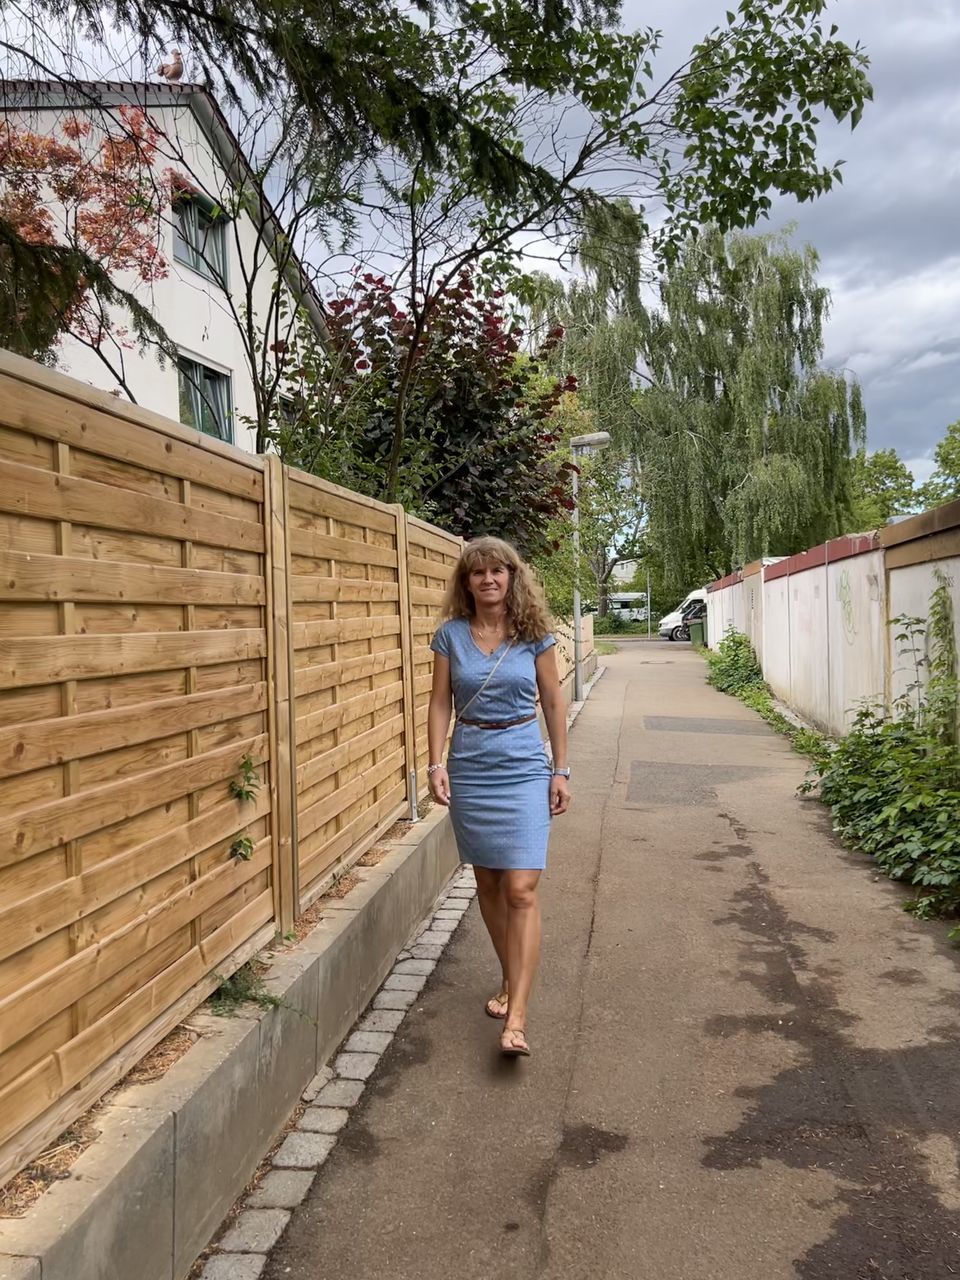 full length, one person, walkway, plant, adult, architecture, women, tree, lifestyles, leisure activity, casual clothing, nature, day, walking, young adult, footpath, built structure, wall, front view, hairstyle, standing, outdoors, female, city, sky, the way forward, clothing, building exterior, person, spring, smiling